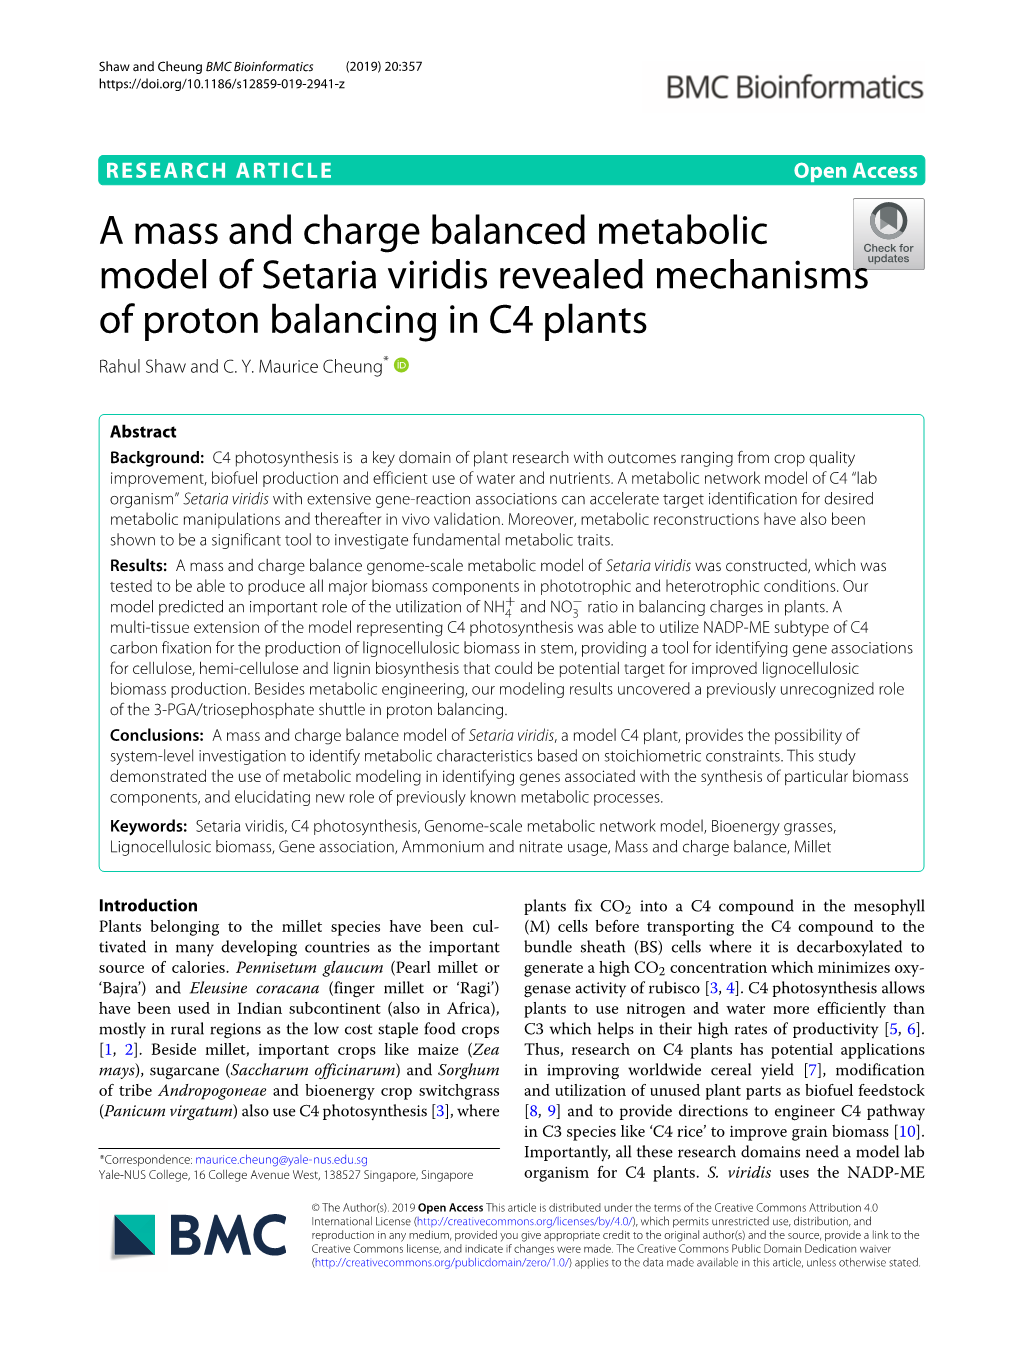 A Mass and Charge Balanced Metabolic Model of Setaria Viridis Revealed Mechanisms of Proton Balancing in C4 Plants Rahul Shaw and C